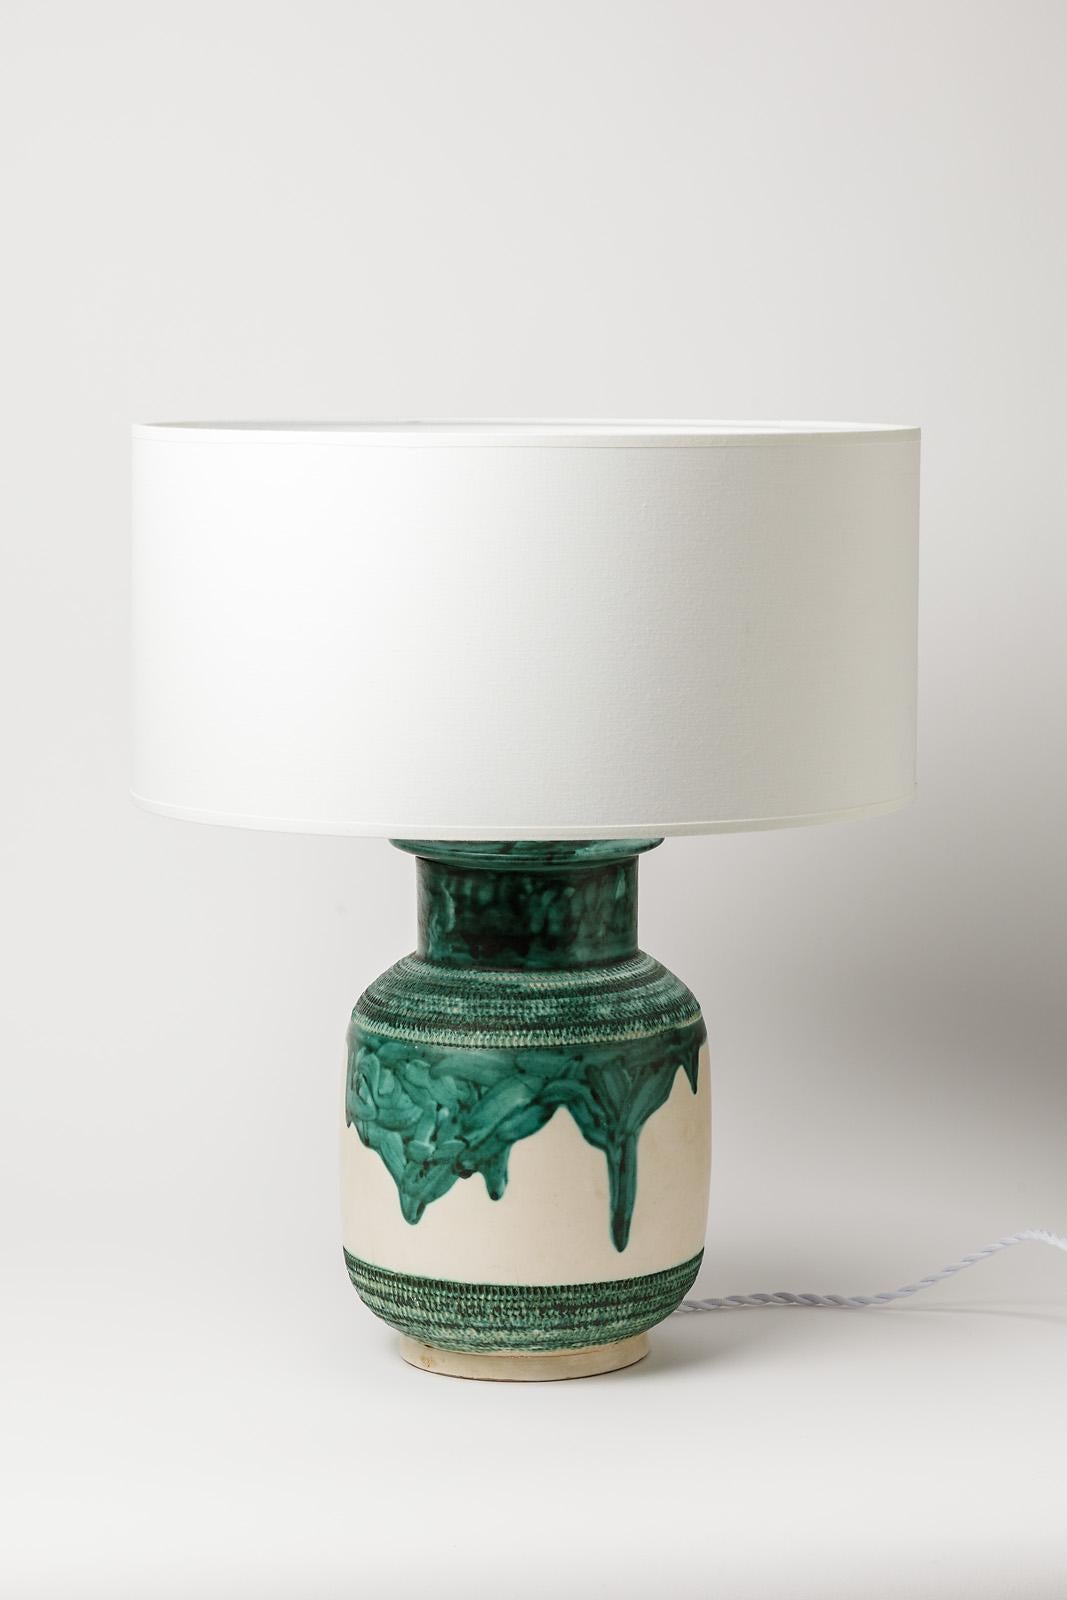 White and Green 20th Century Ceramic Table Lamp by Dupanier French Lighting 1960 For Sale 1